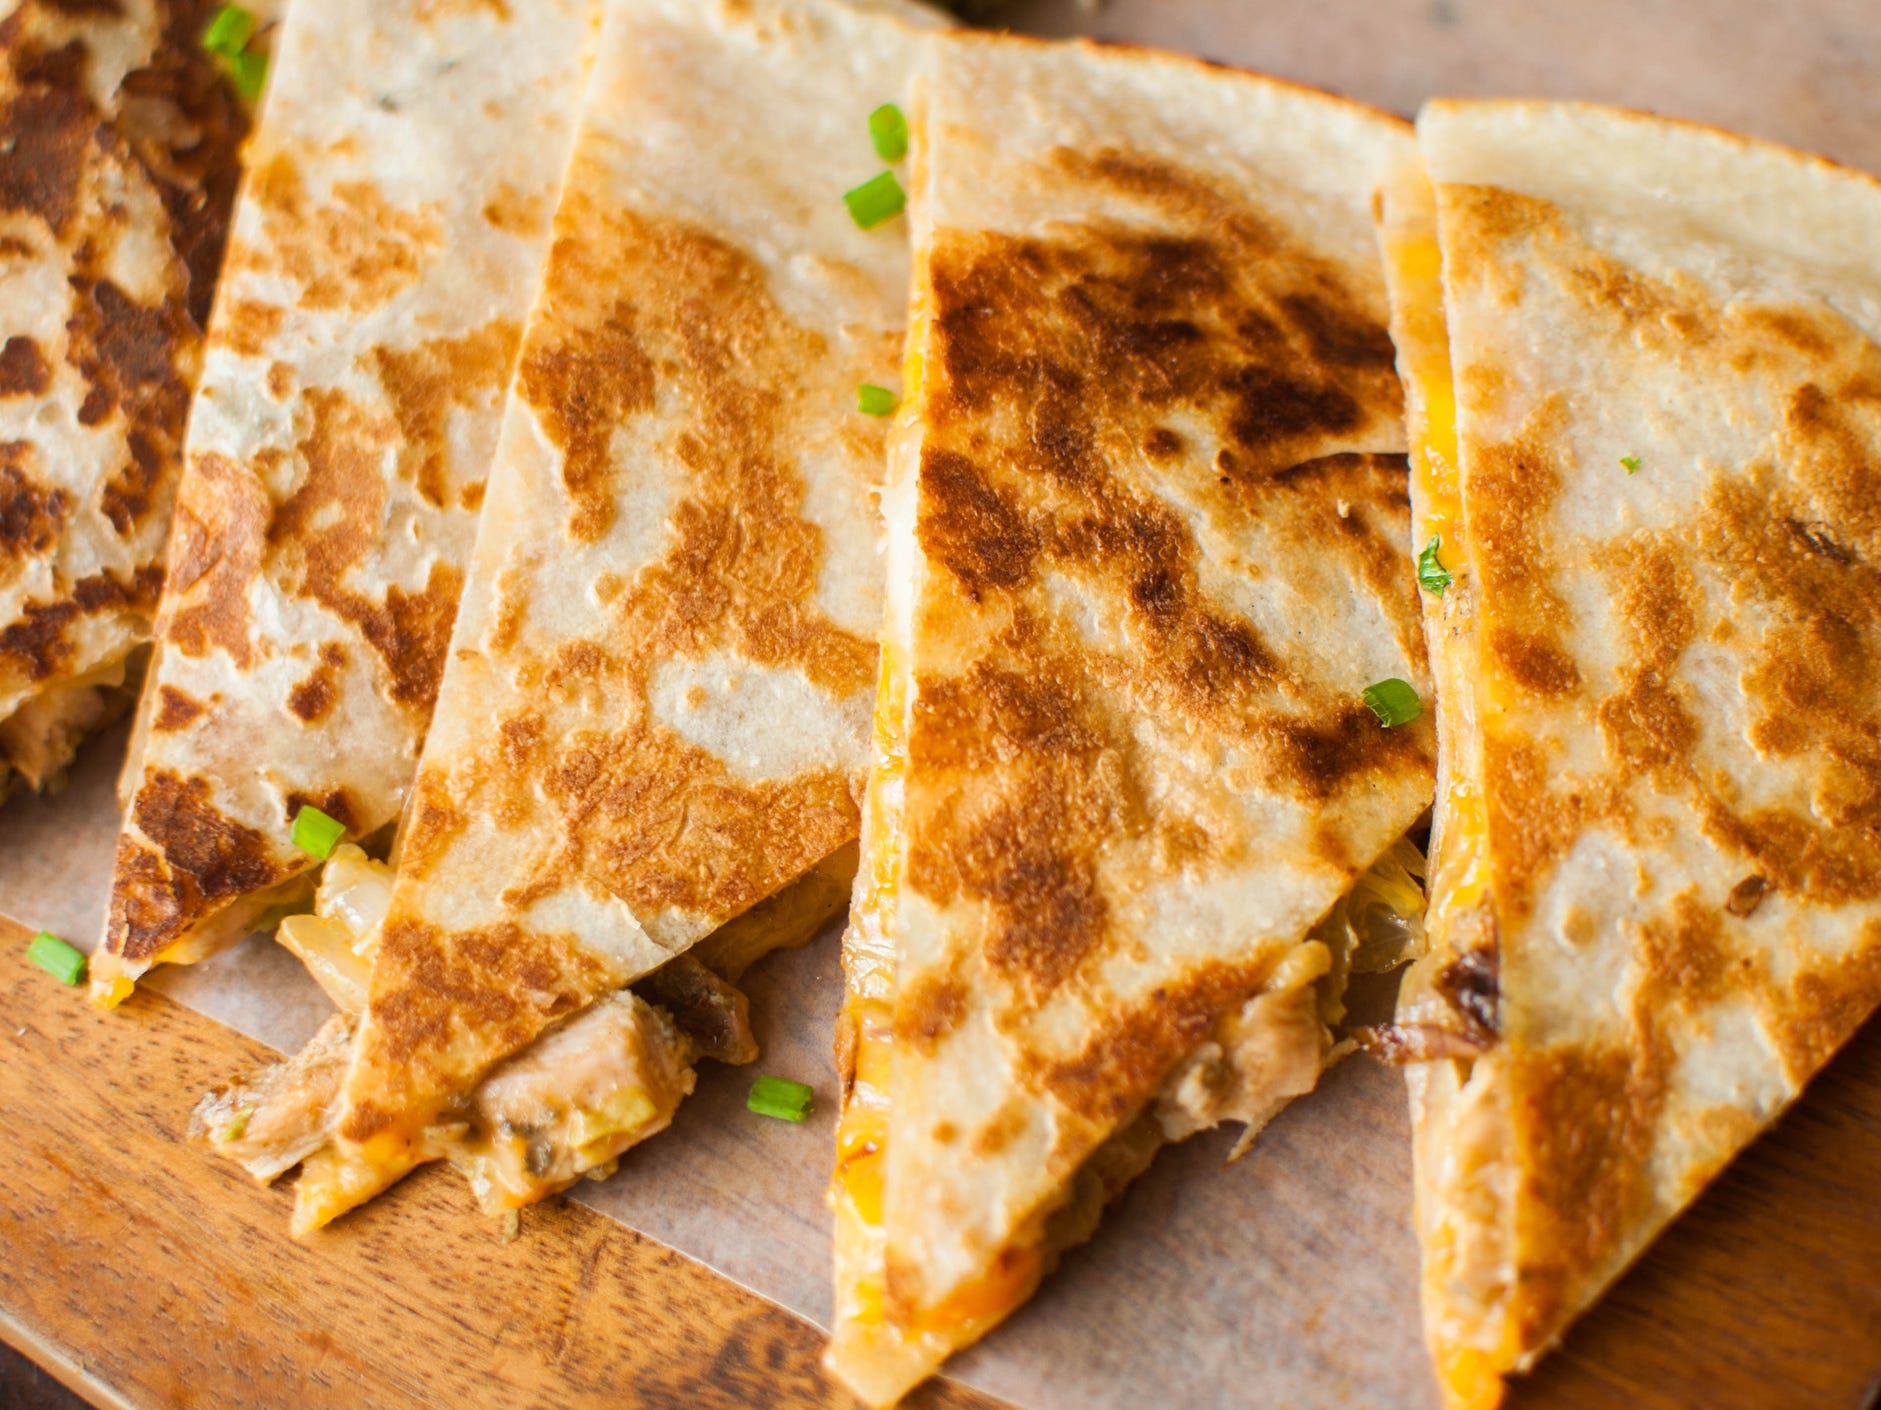 A chicken and cheese quesadilla sliced into wedges and laid out in a line